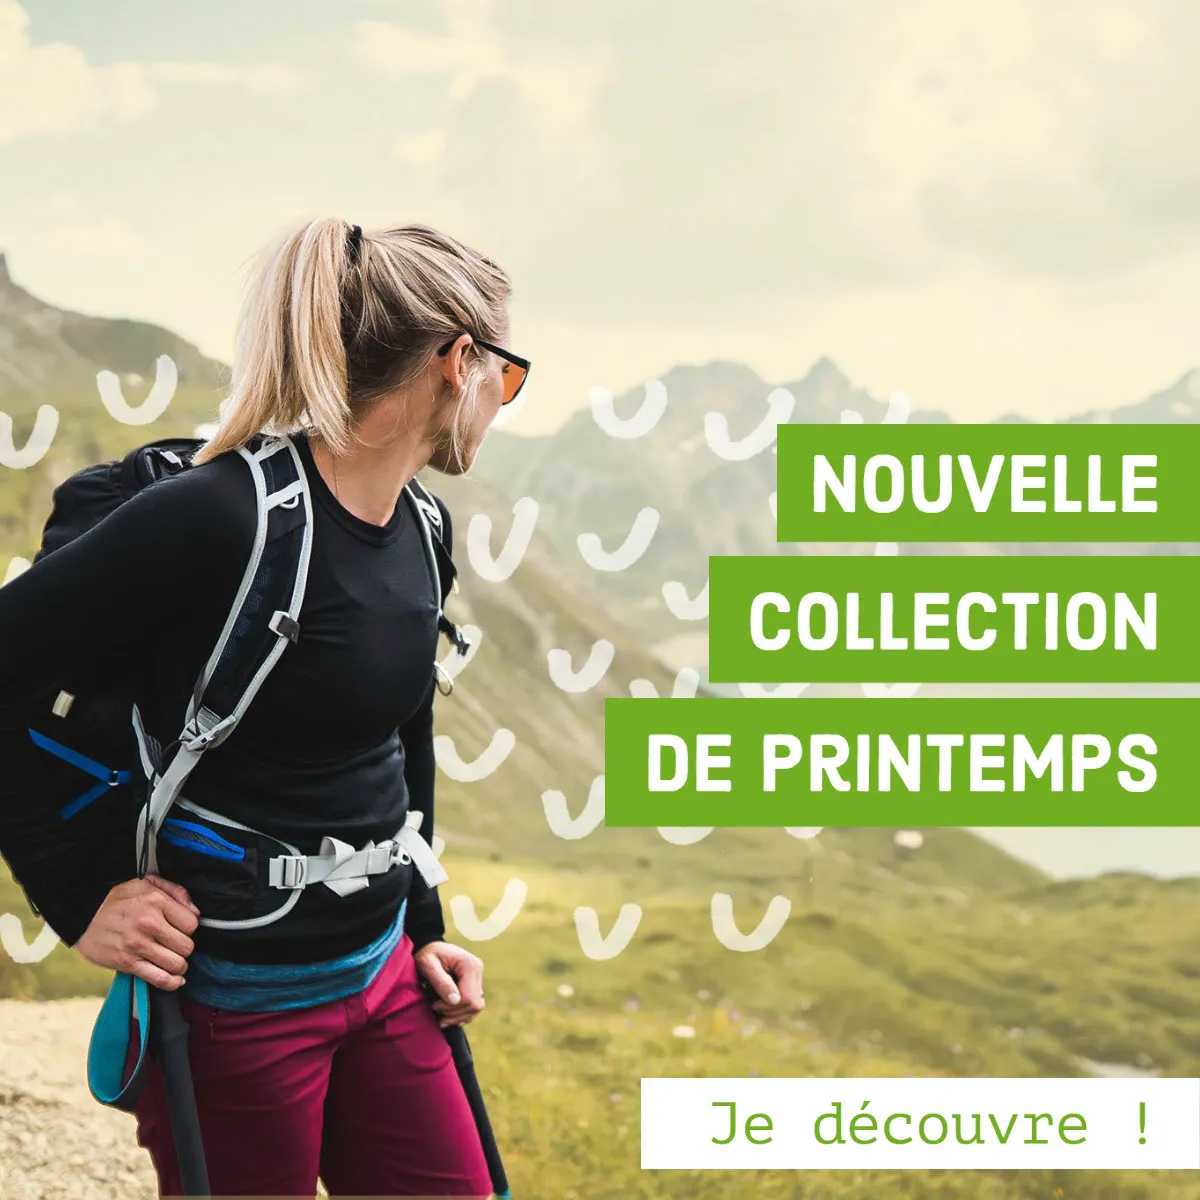 Green Hiking Gear New Collection Facebook Ad